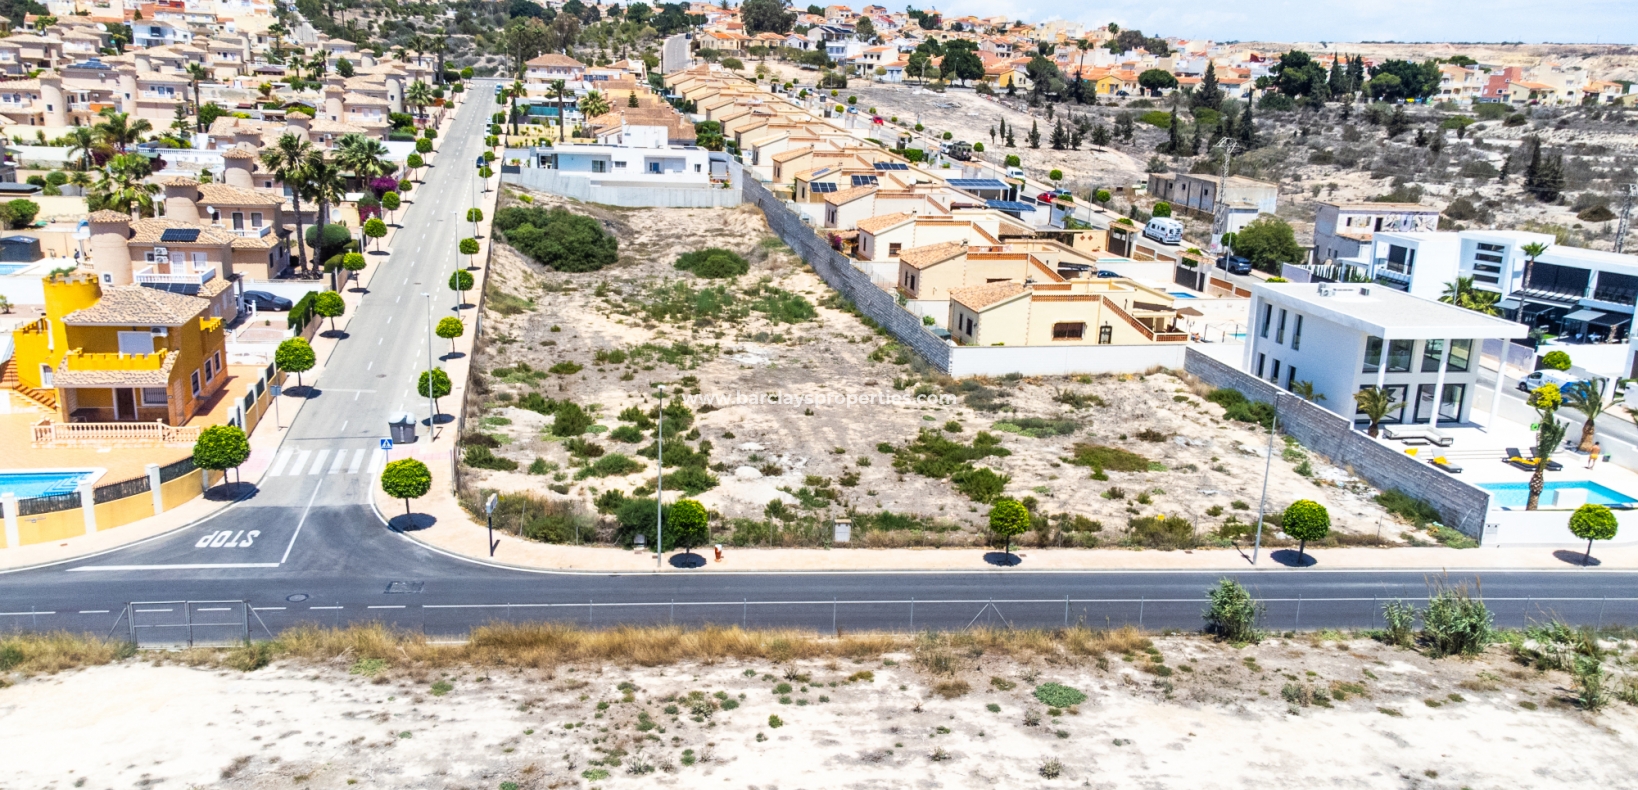 Land for sale close to the beach in Alicante